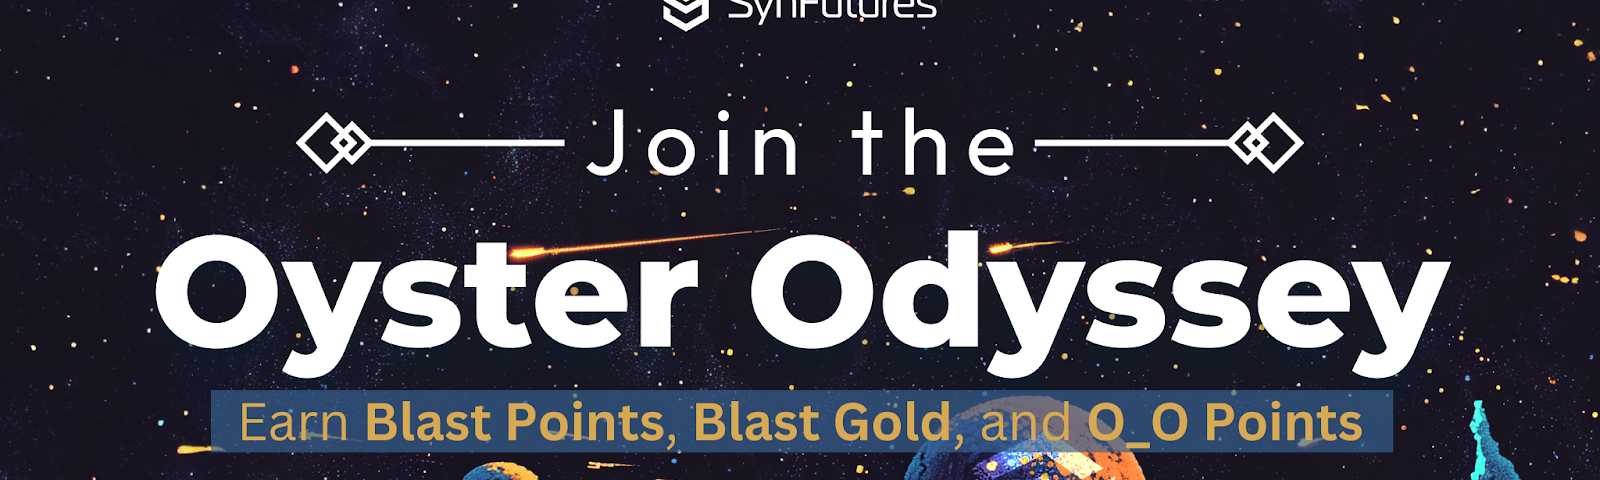 SynFutures Oyster Odyssey 2.0